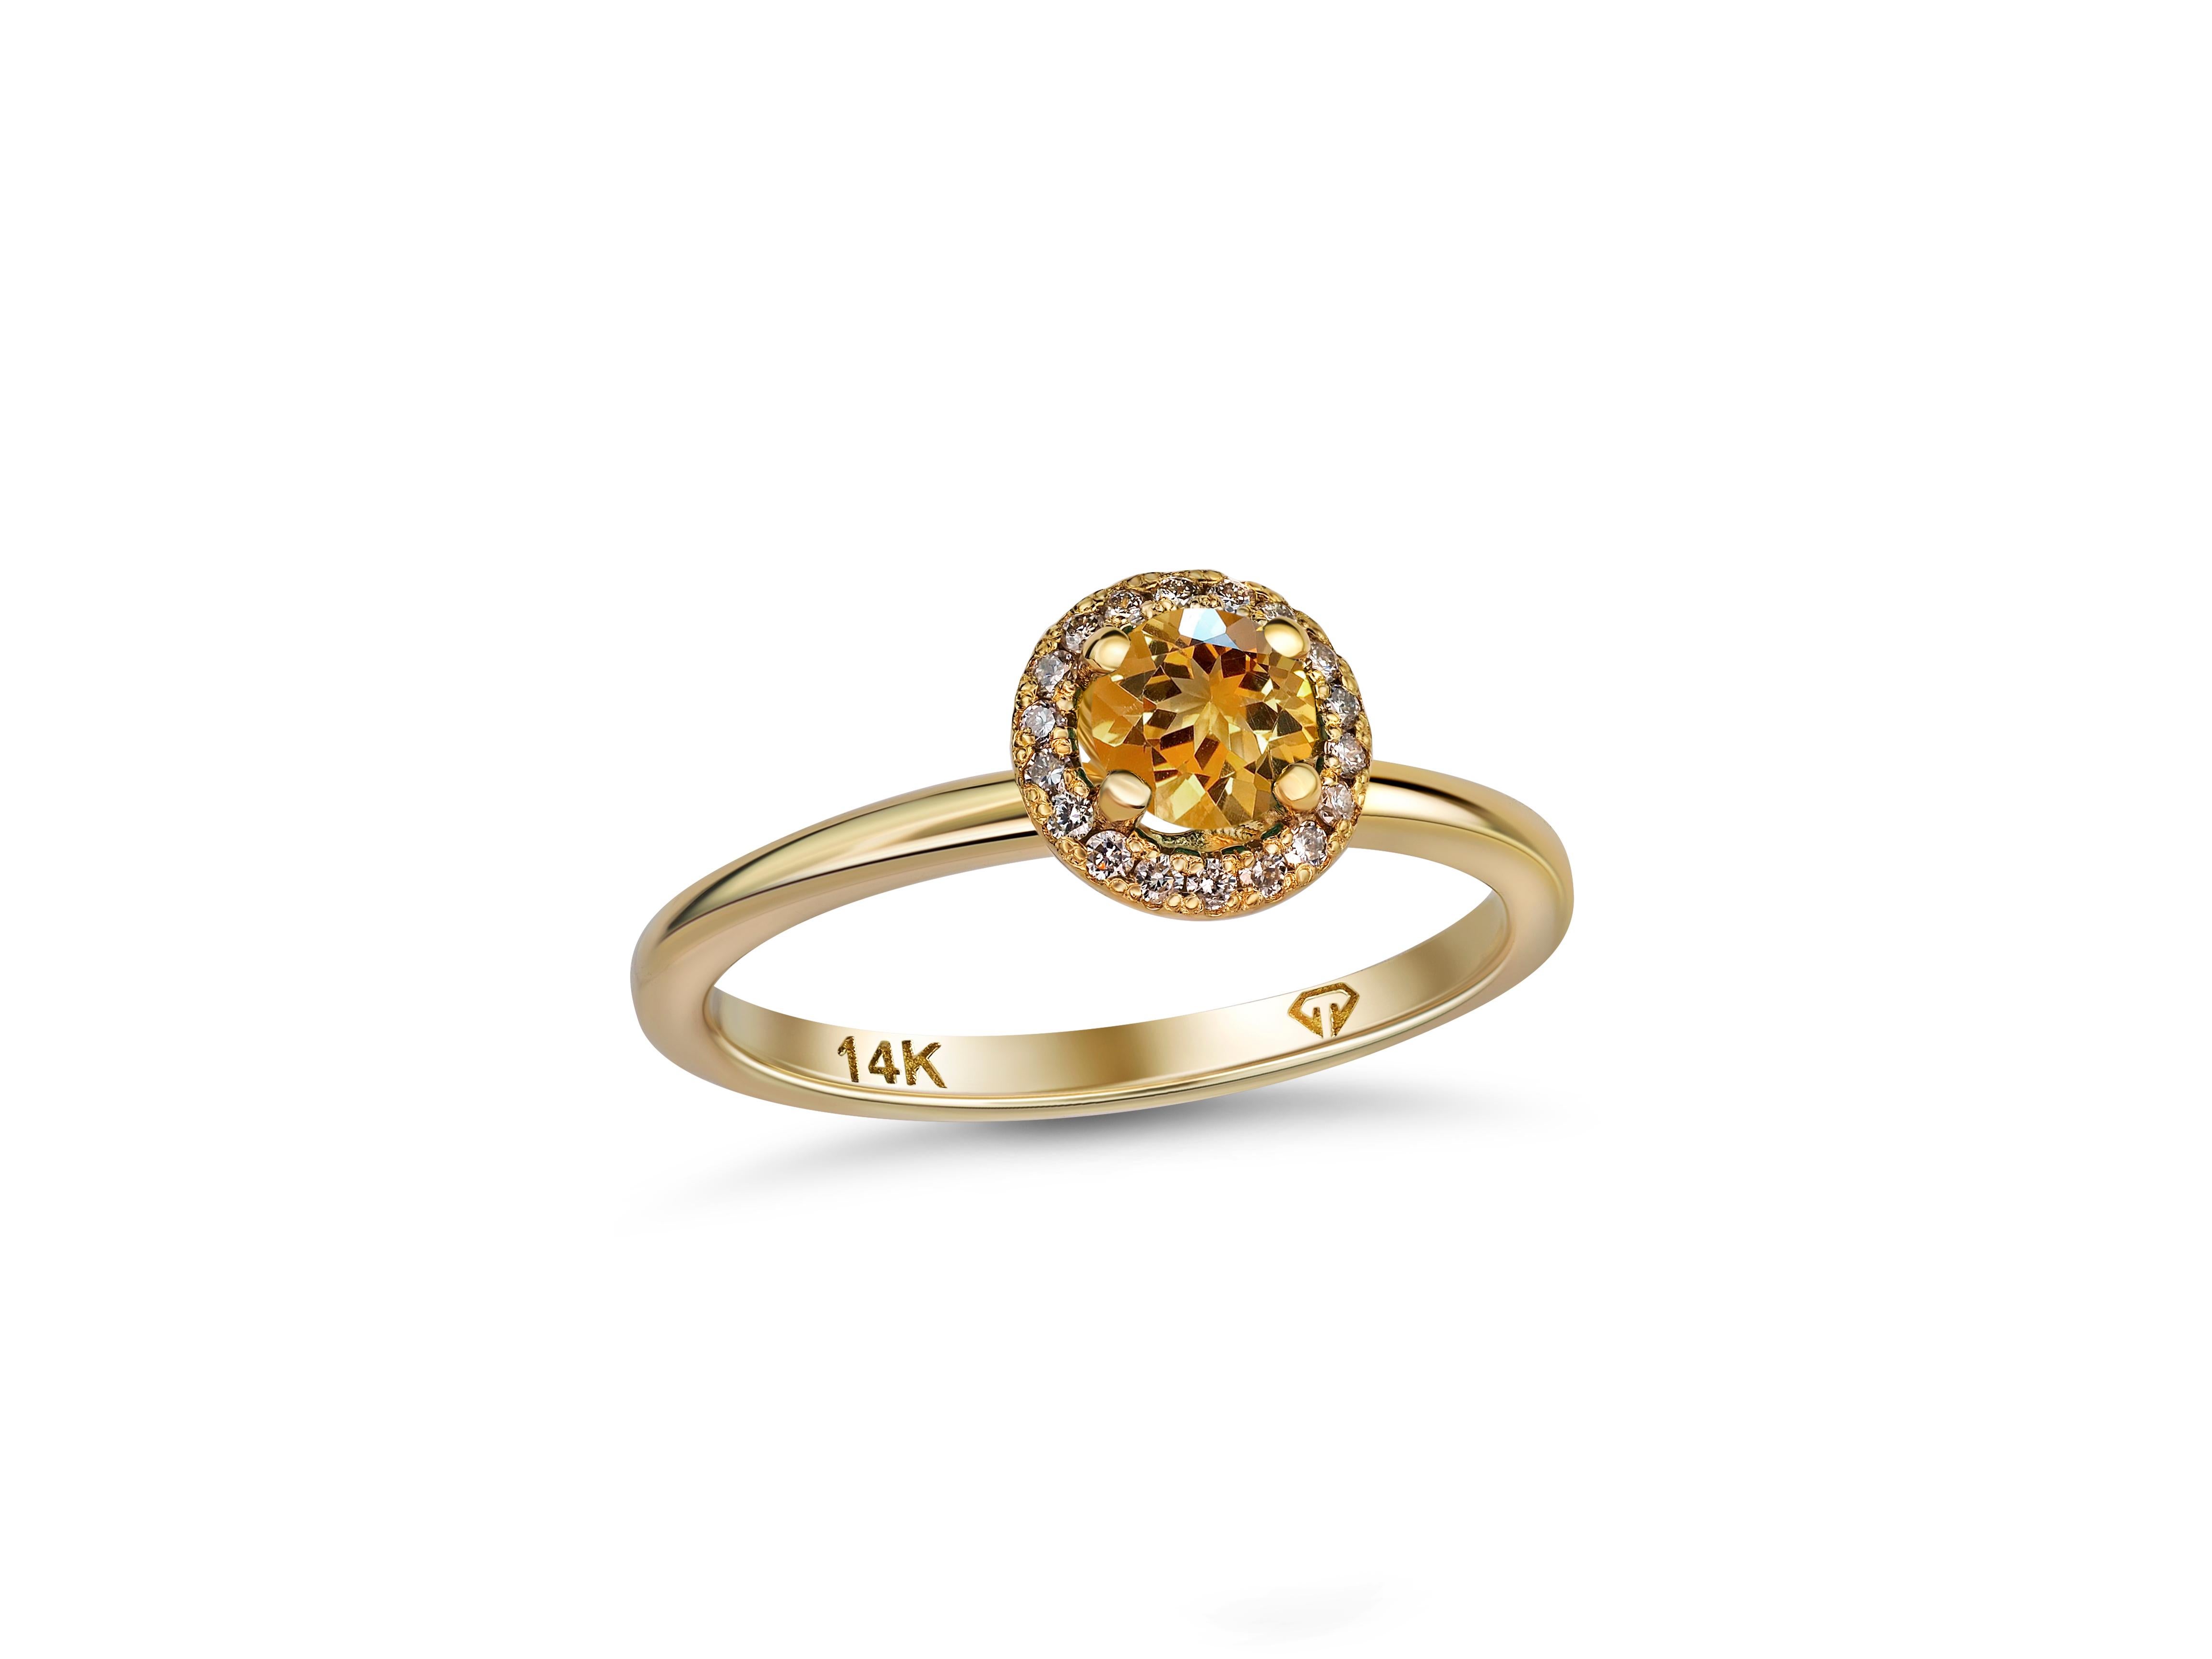 Women's Halo Citrine Ring with Diamonds in 14 Karat Gold.  For Sale